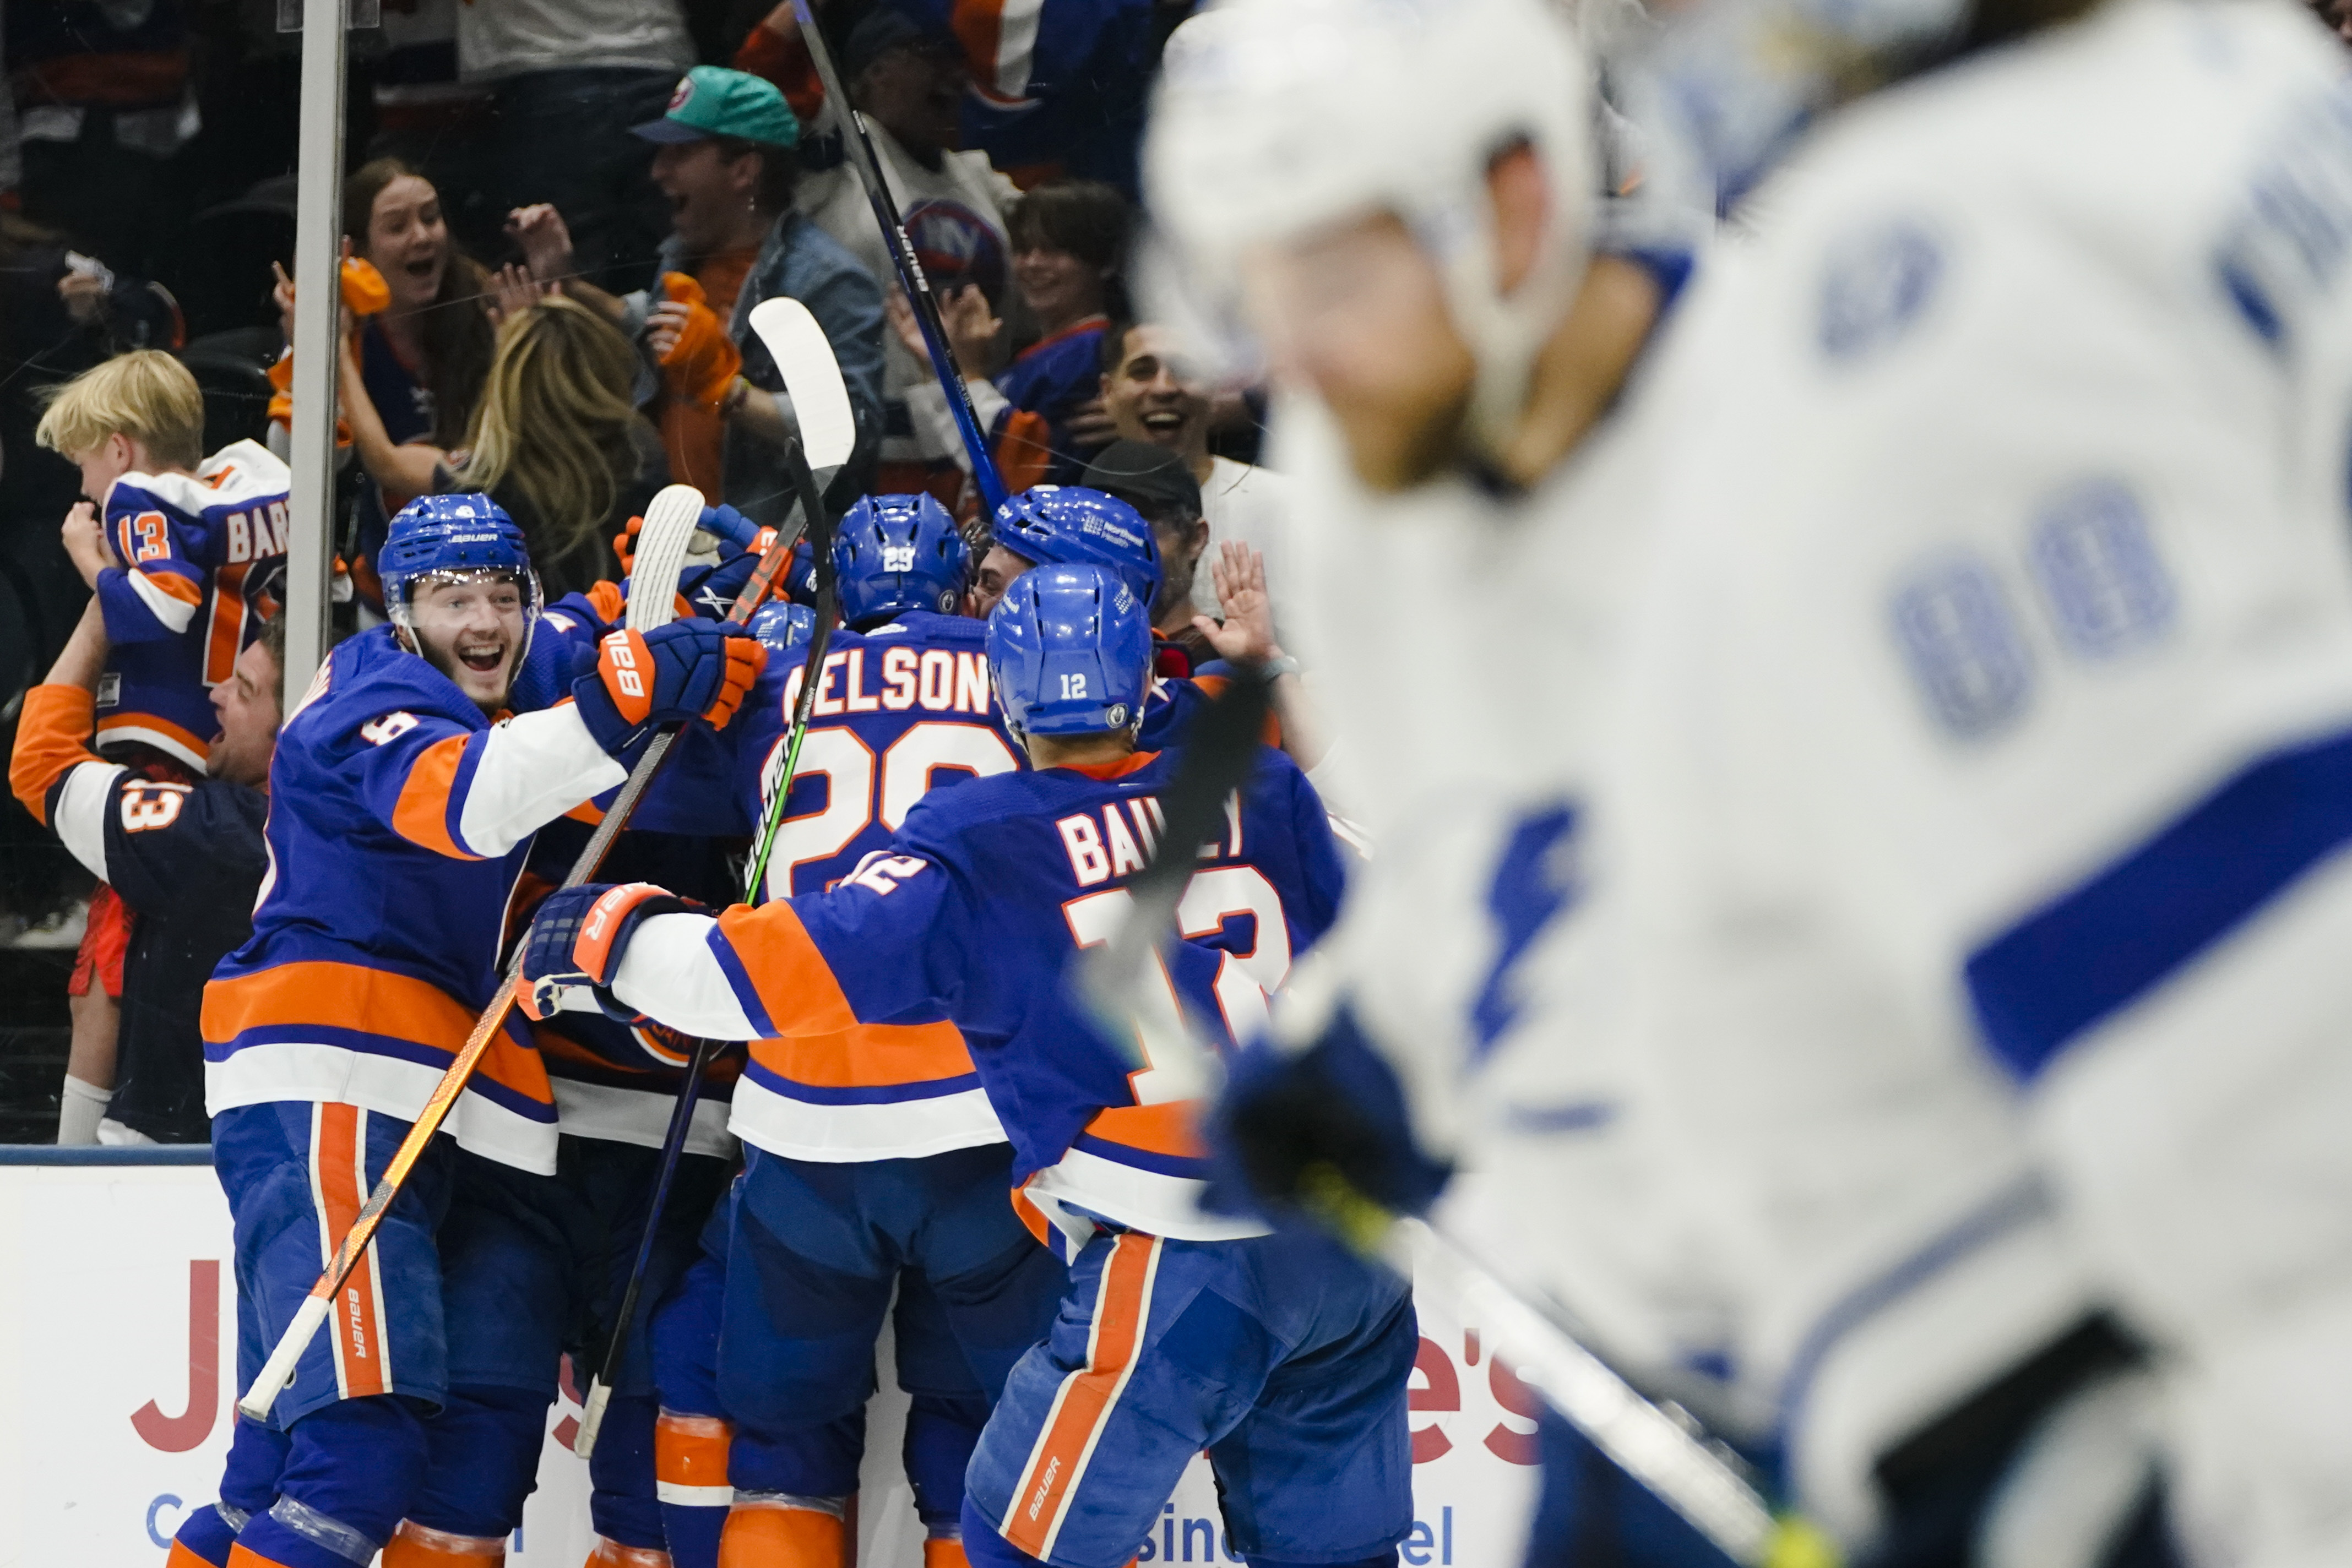 New York Islanders at Tampa Bay Lightning Game 7 free live stream (6/25/21) How to watch NHL Playoffs, time, channel